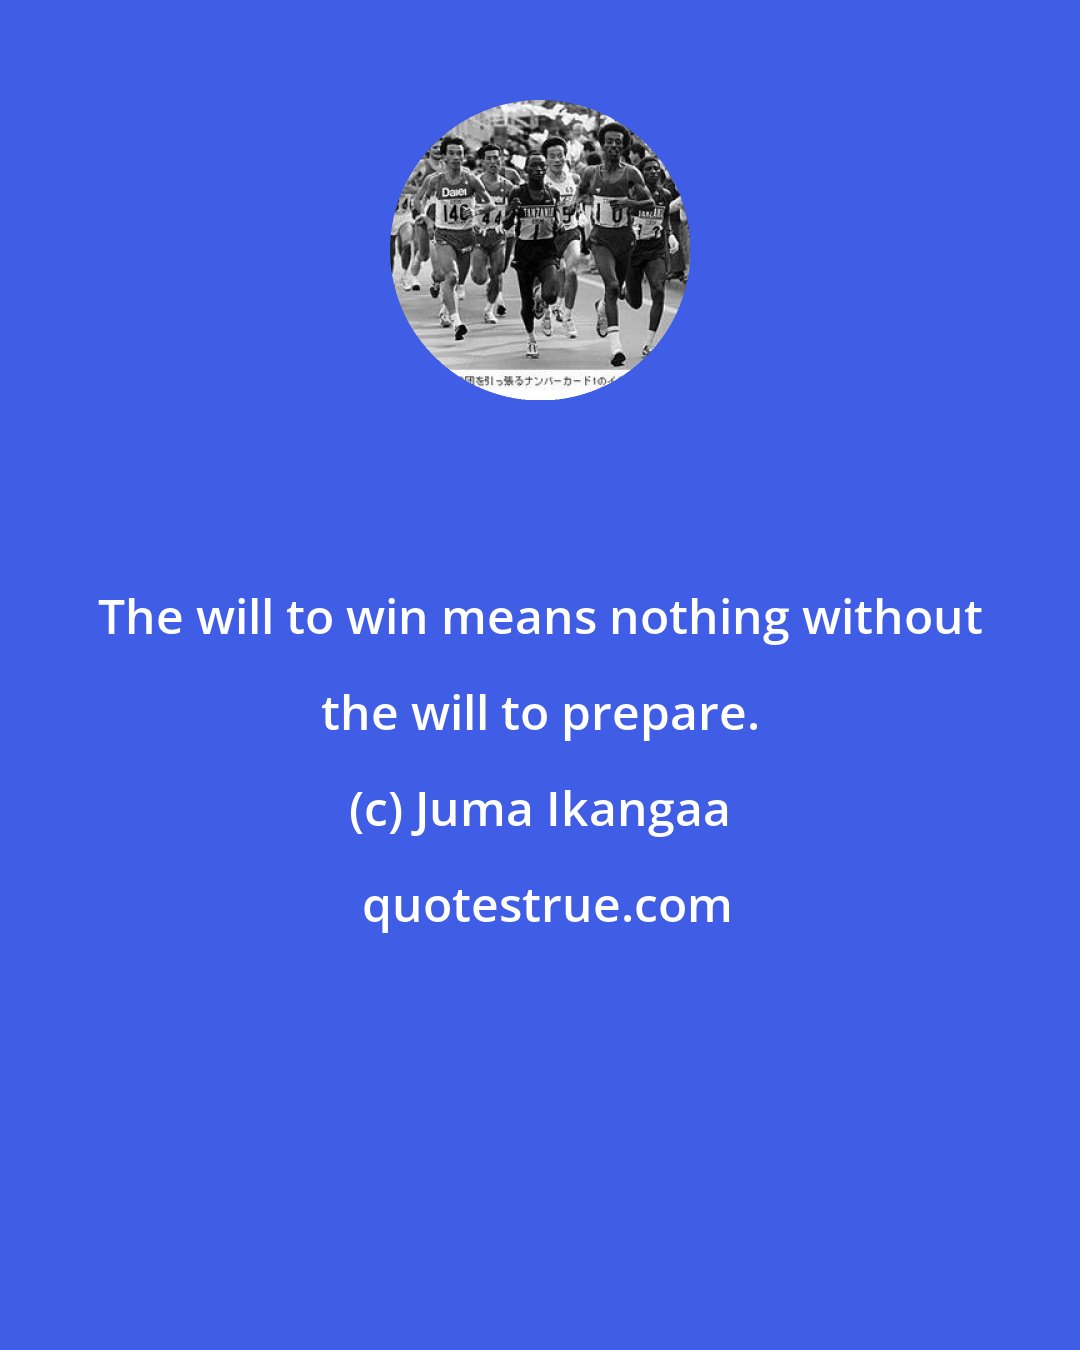 Juma Ikangaa: The will to win means nothing without the will to prepare.